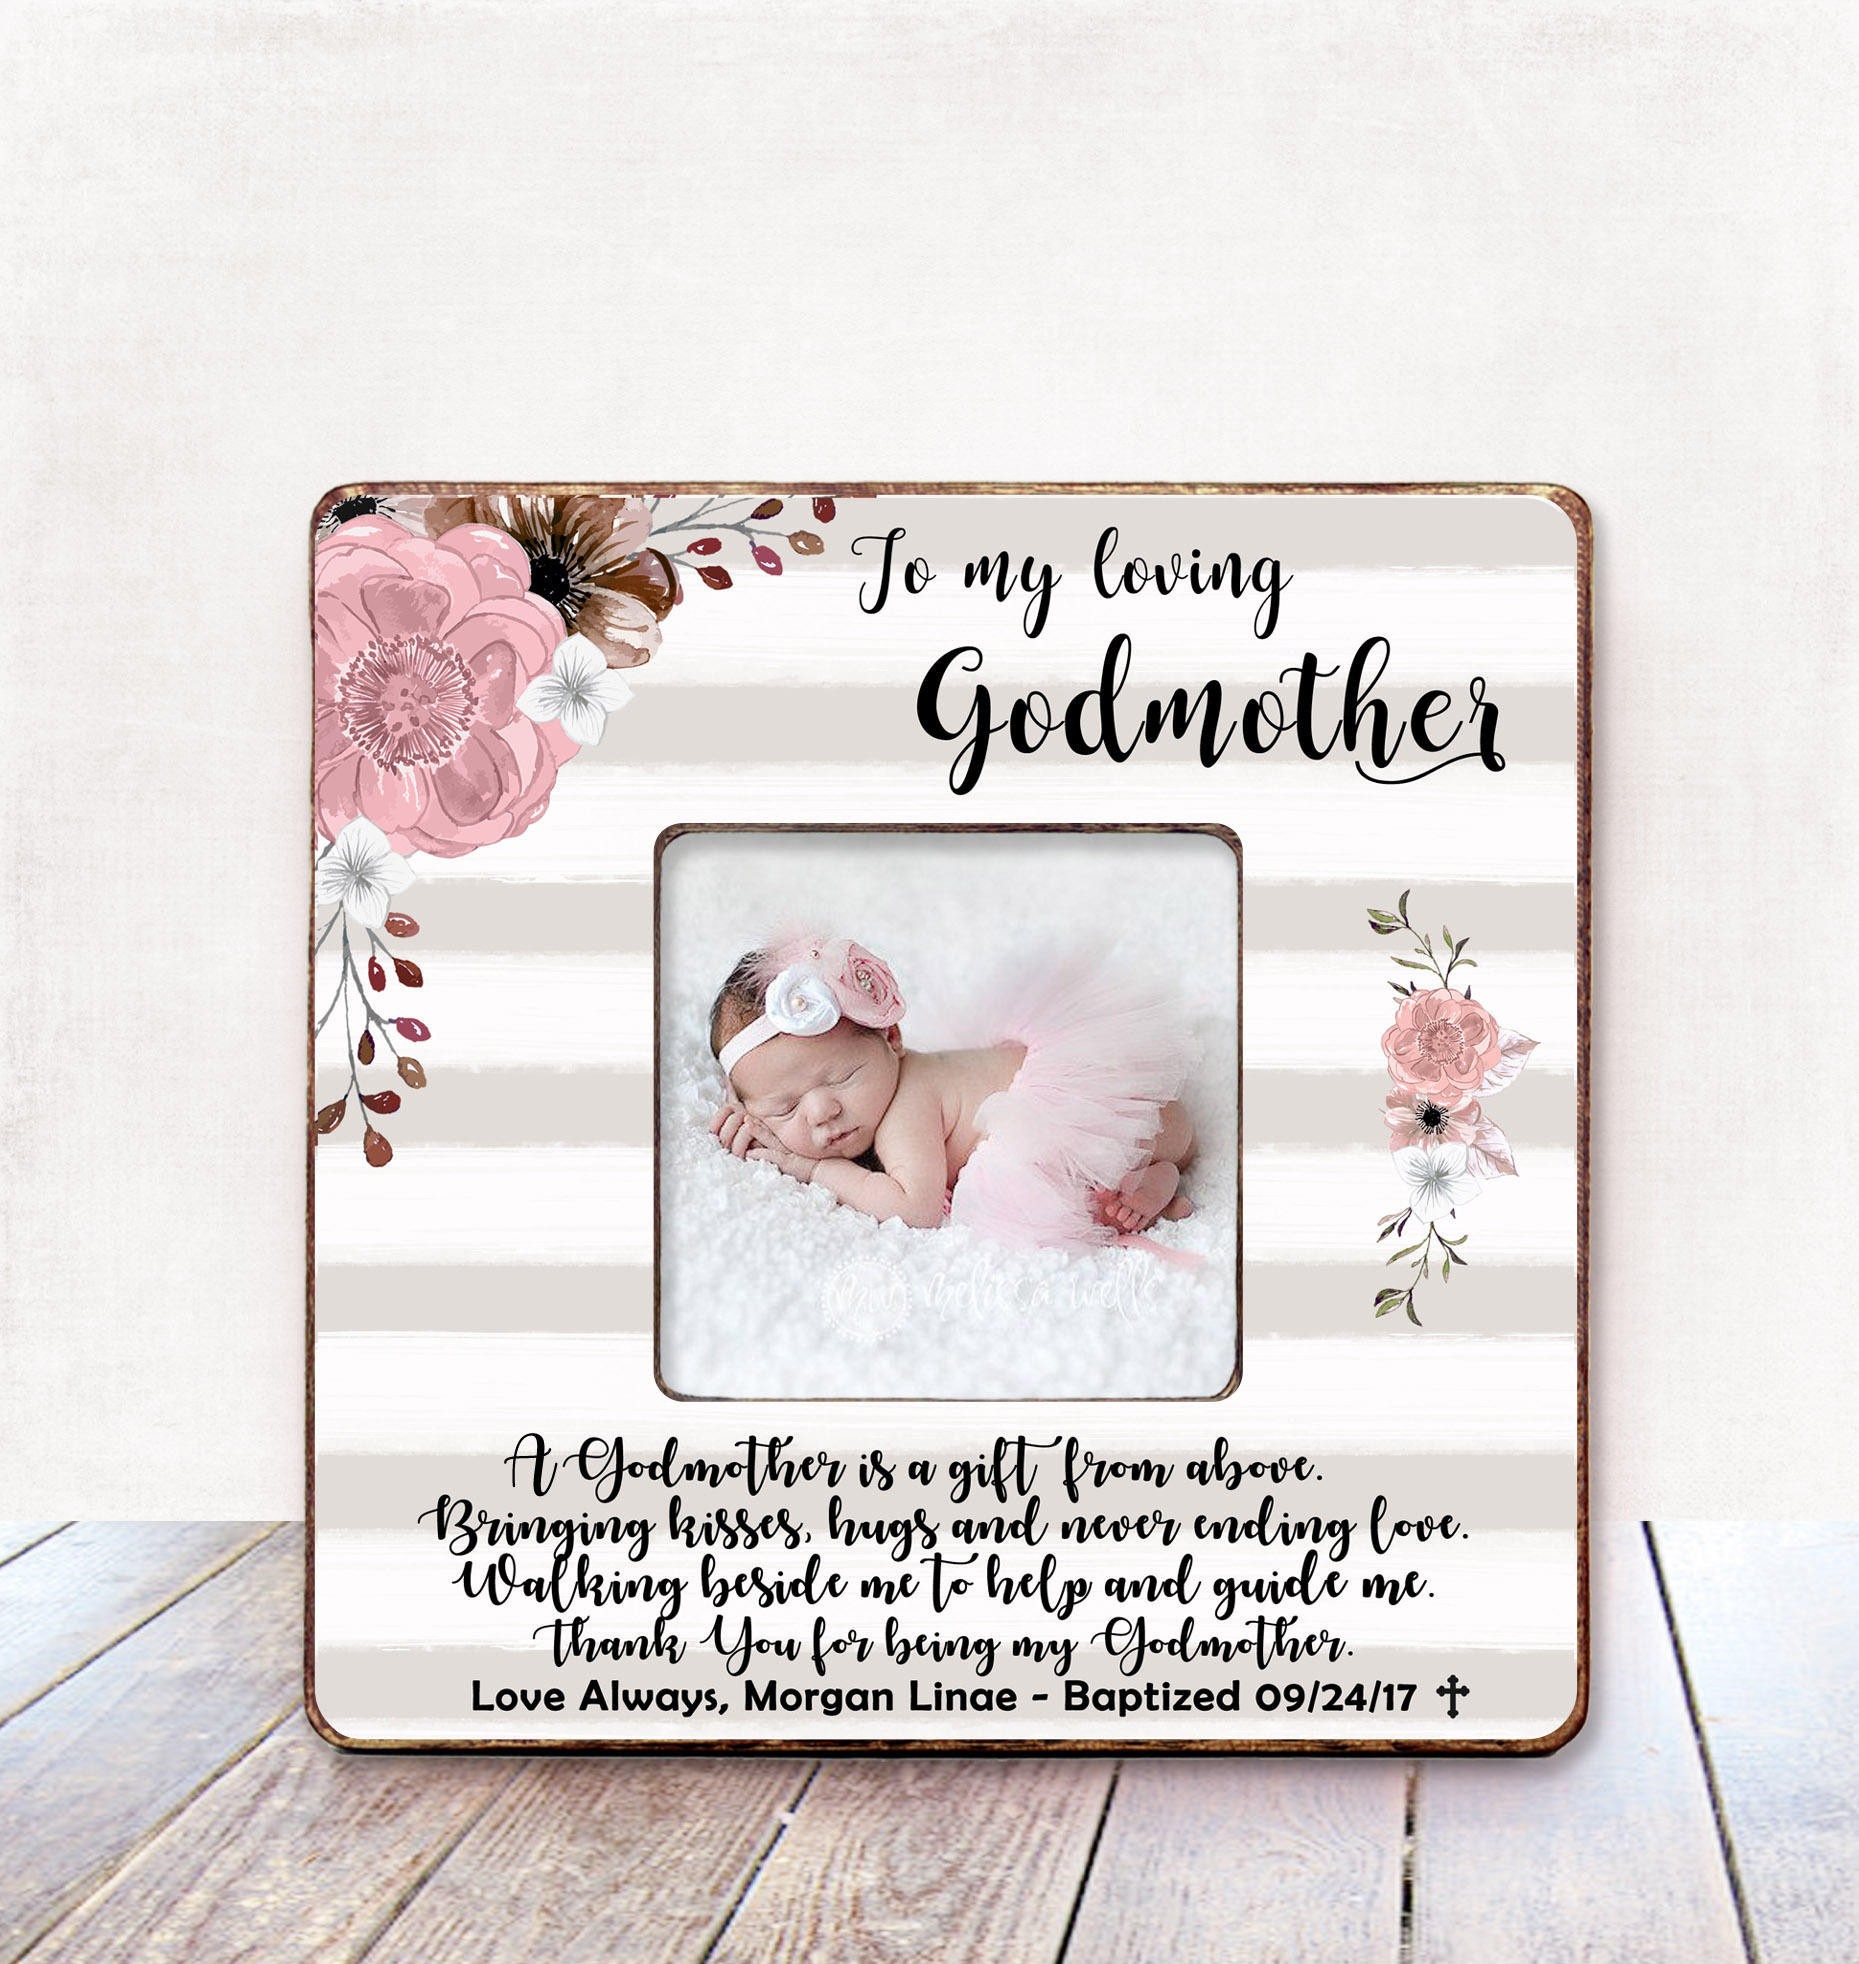 Christening Gift Ideas From Godmother
 Godmother Gift for Godmother Baptism Gift Godmother